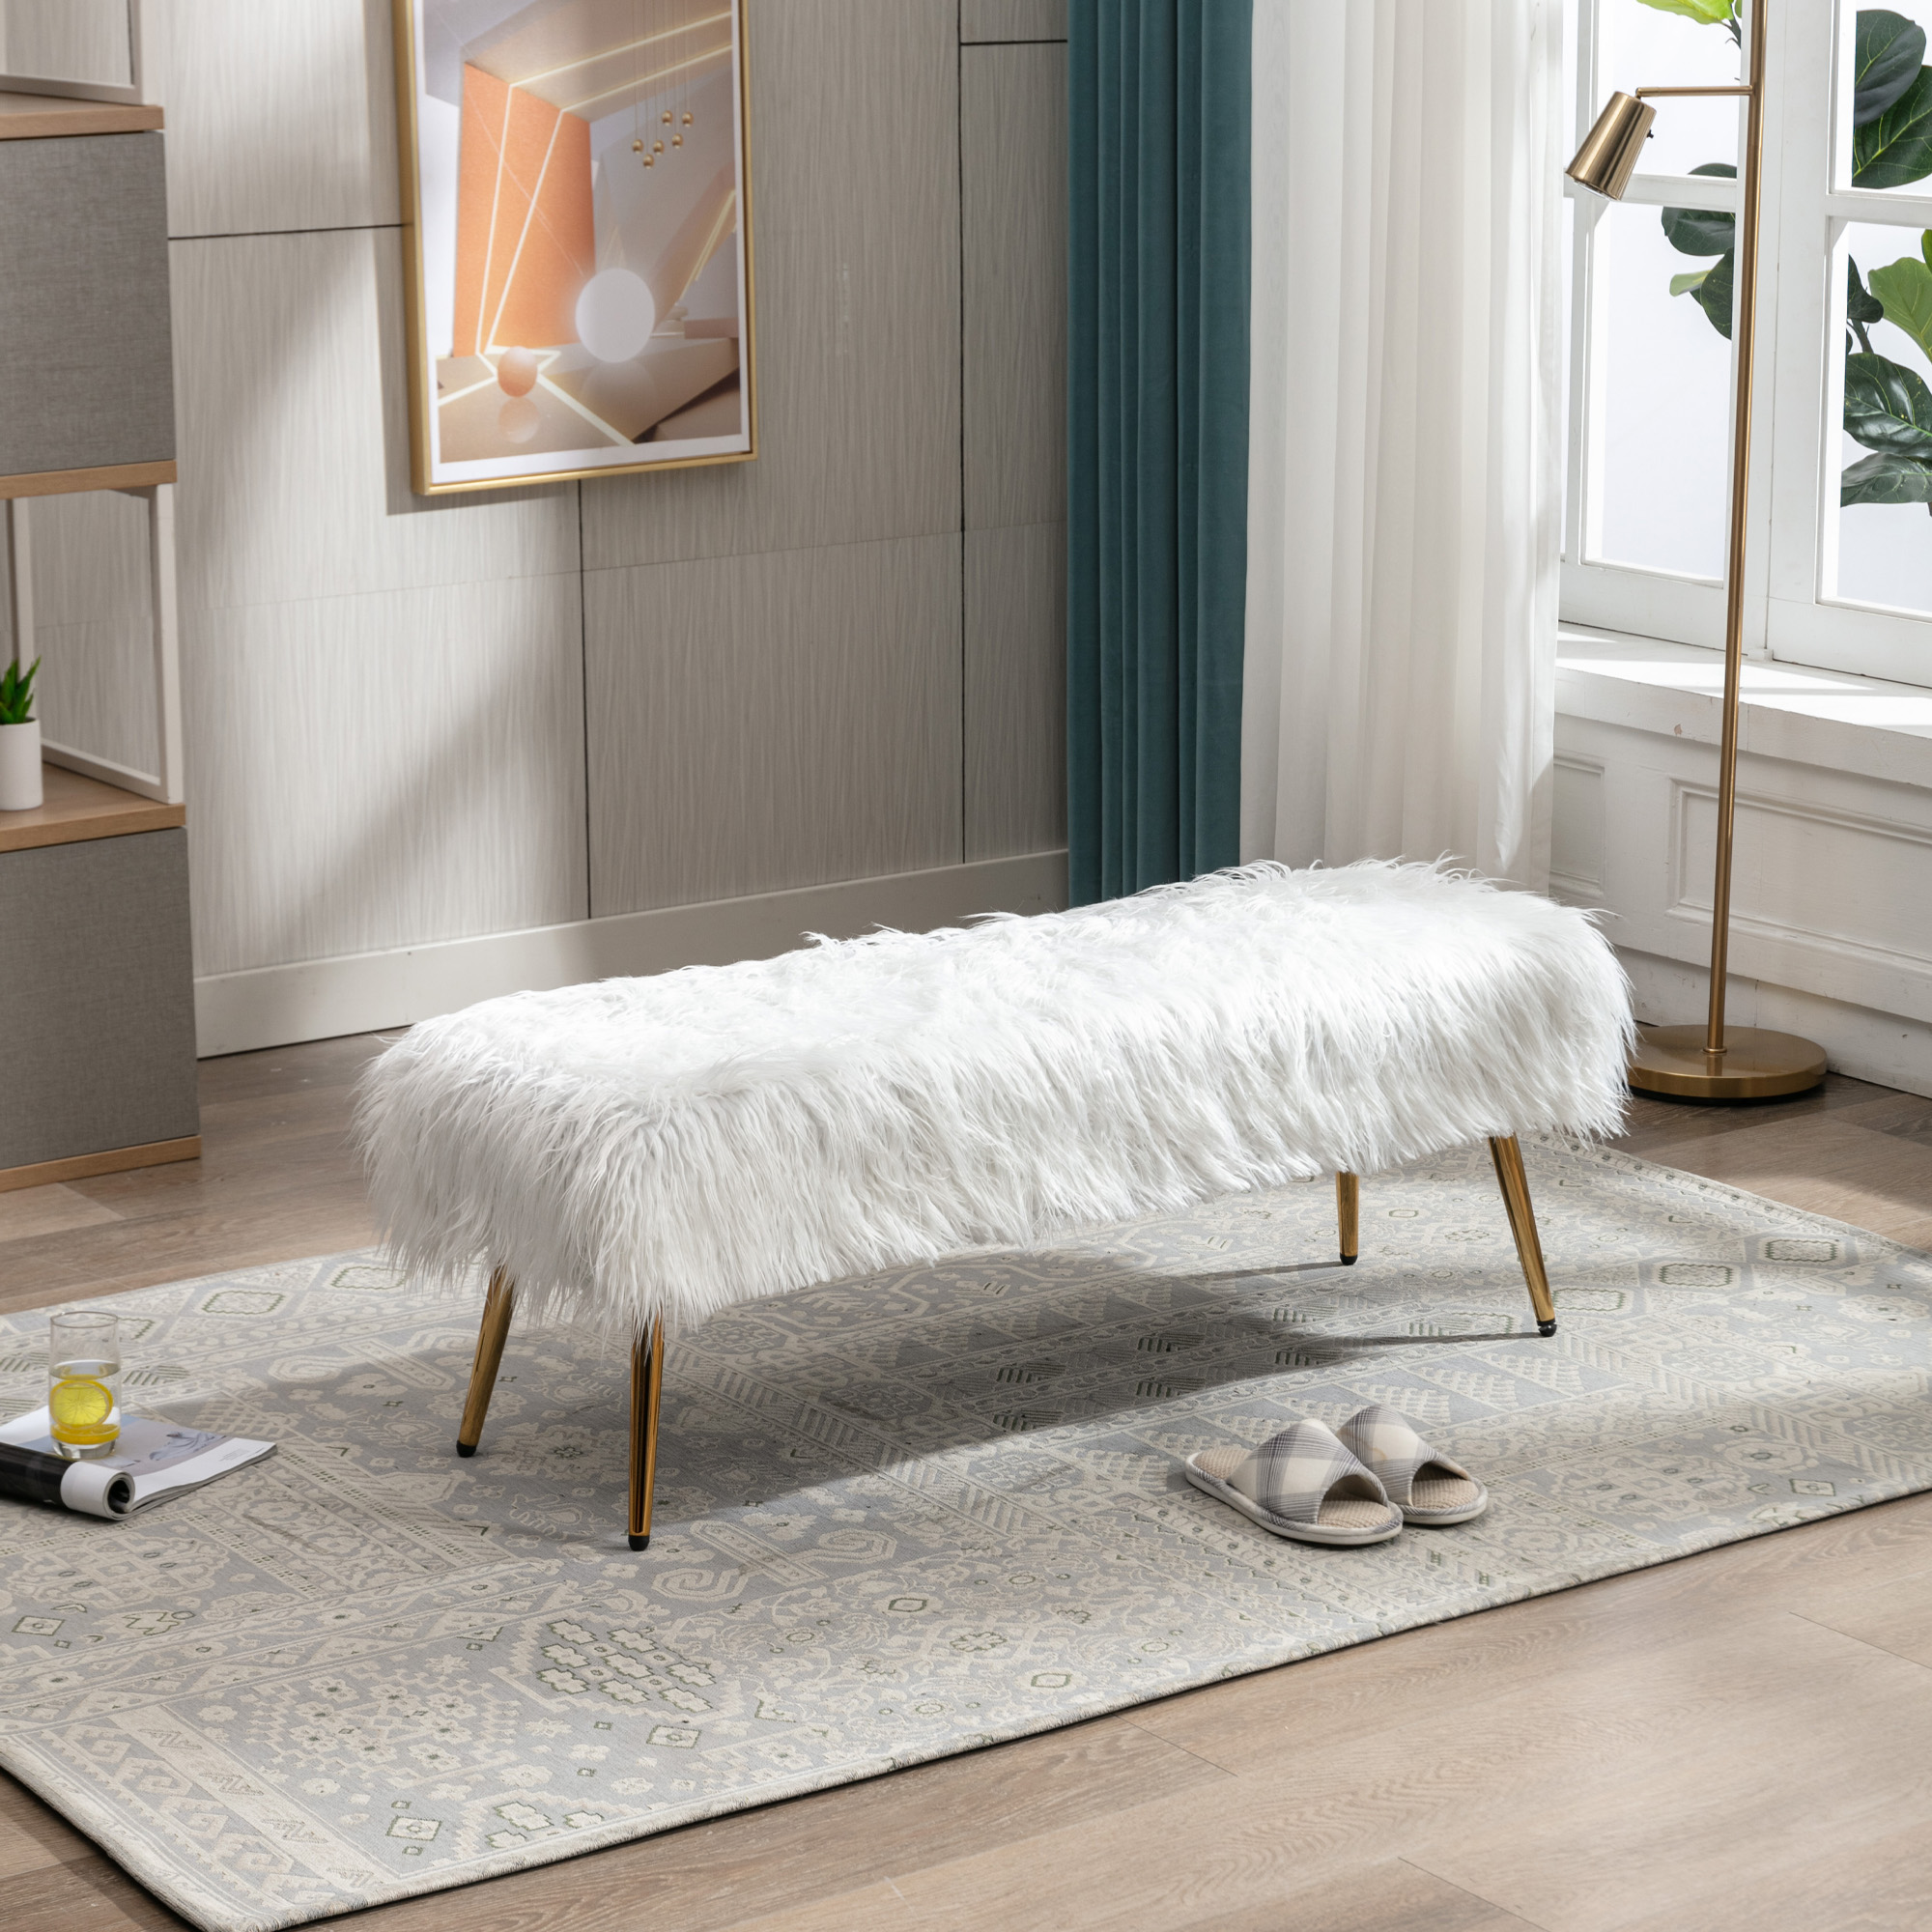 HengMing Faux Fur Plush Ottoman Bench, Modern Fluffy Upholstered Bench for Entryway Dining Room Living Room Bedroom, White